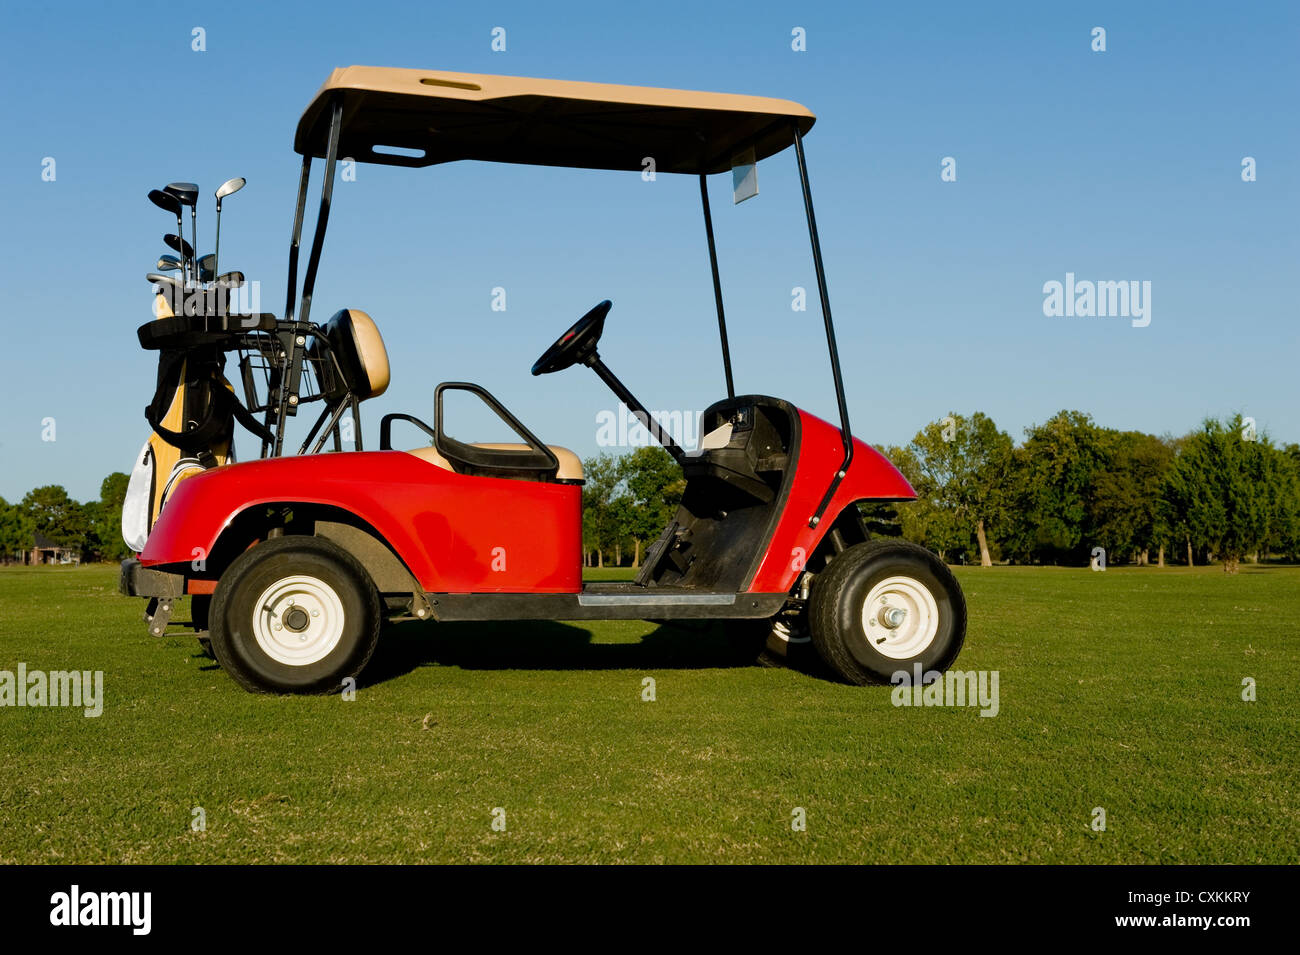 A red golf cart or buggy on a golf course with golf clubs etc Stock Photo